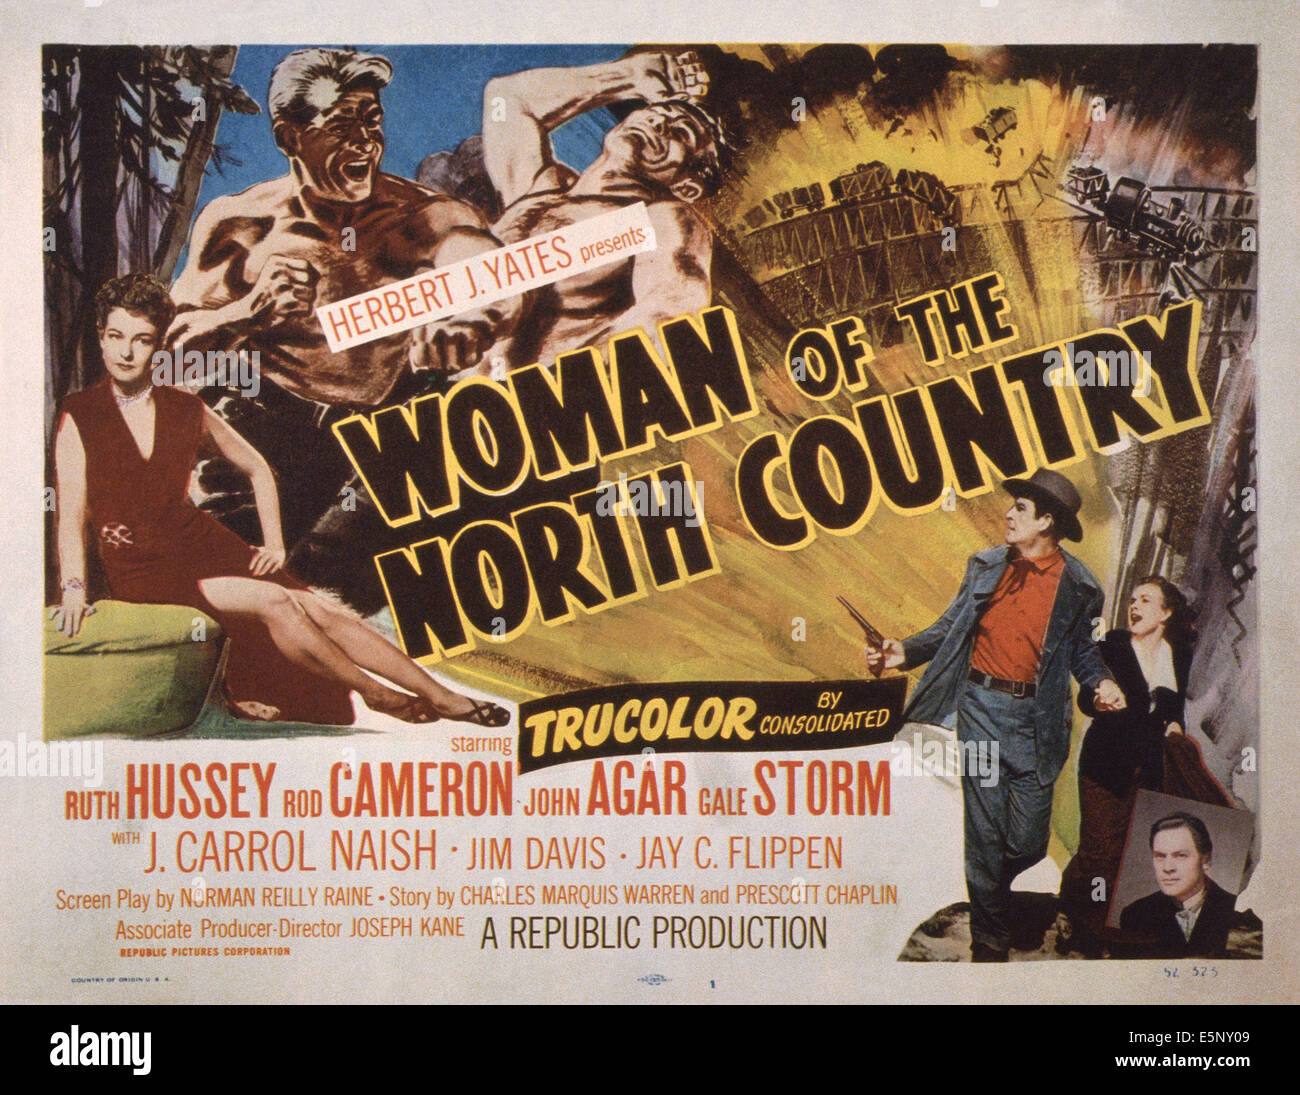 WOMAN OF THE NORTH COUNTRY, US lobbycard, far left: Ruth Hussey; bottom right:  Rod Cameron, Gale Storm, John Agar, 1952 Stock Photo